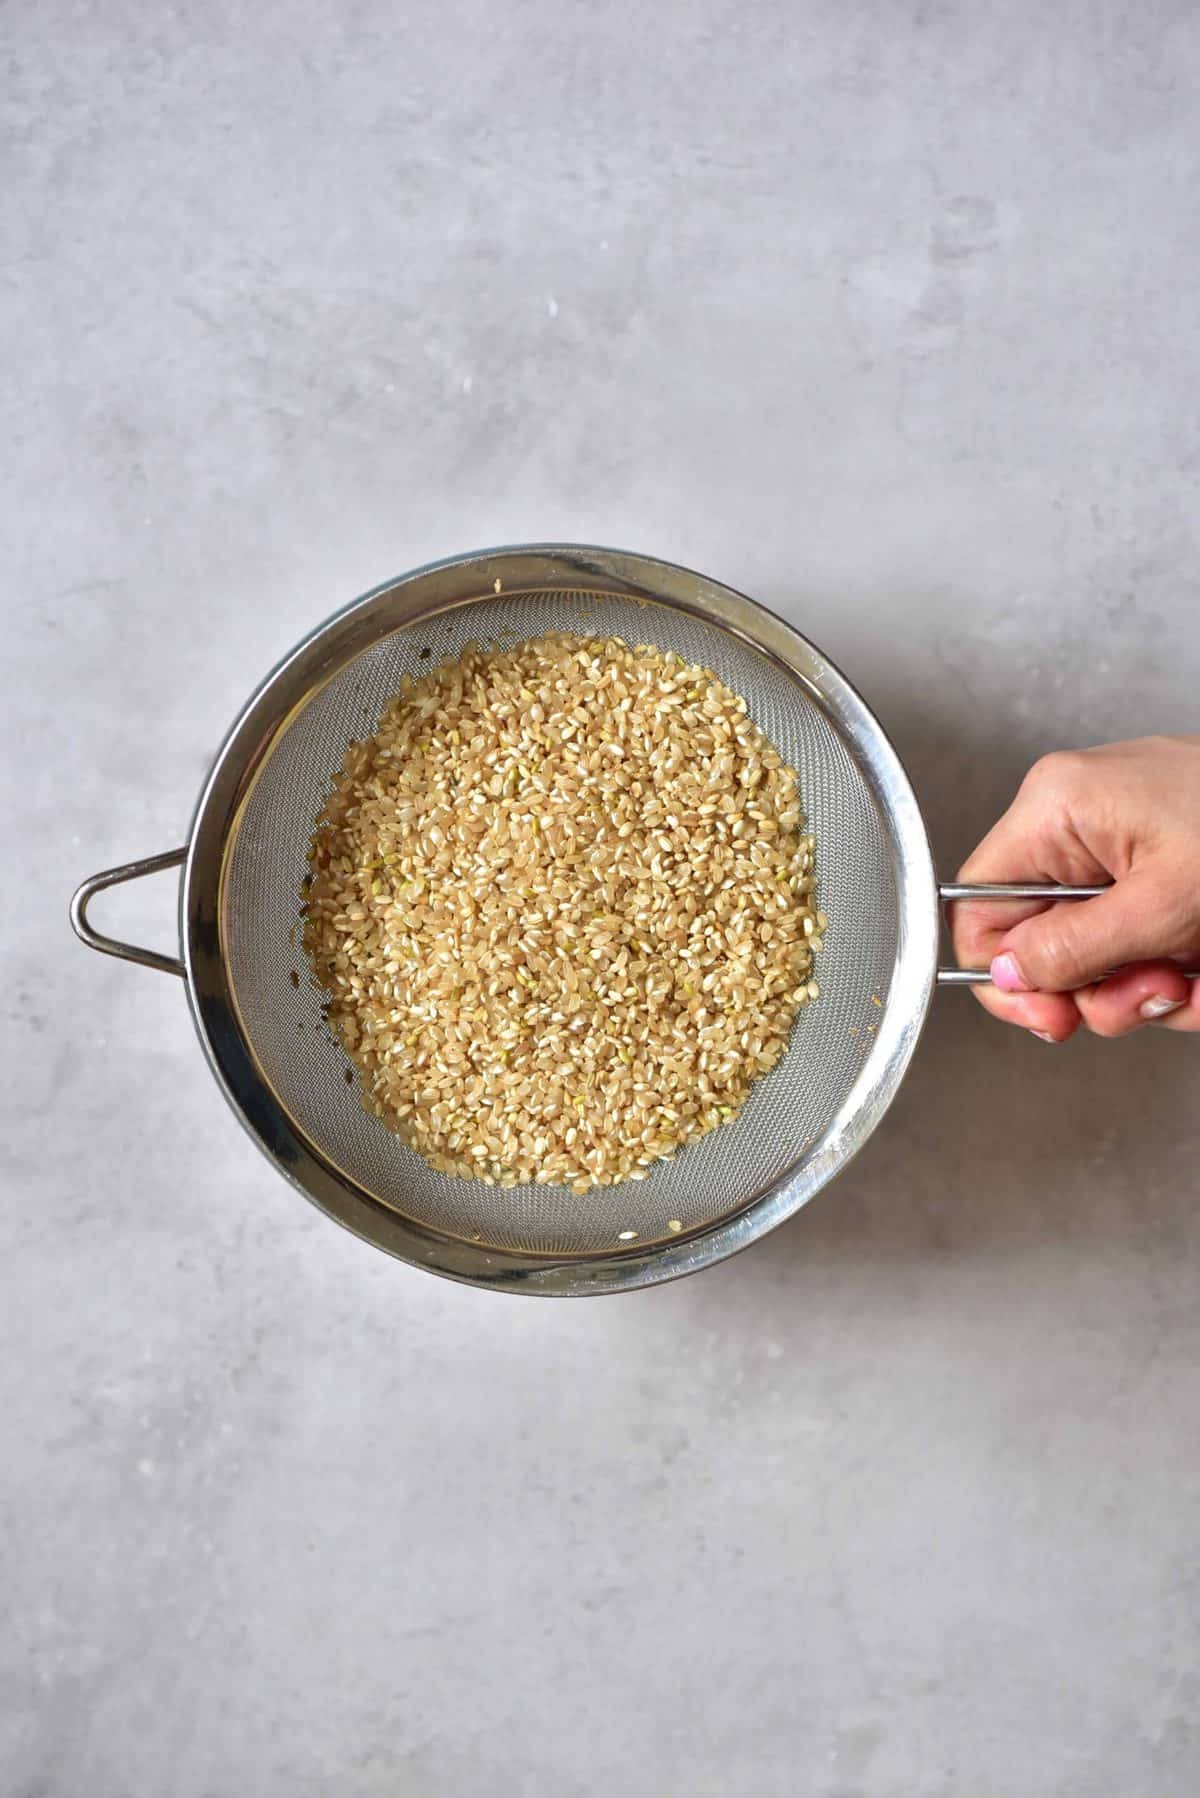 Short grain brown rice - make sure to rinse it well